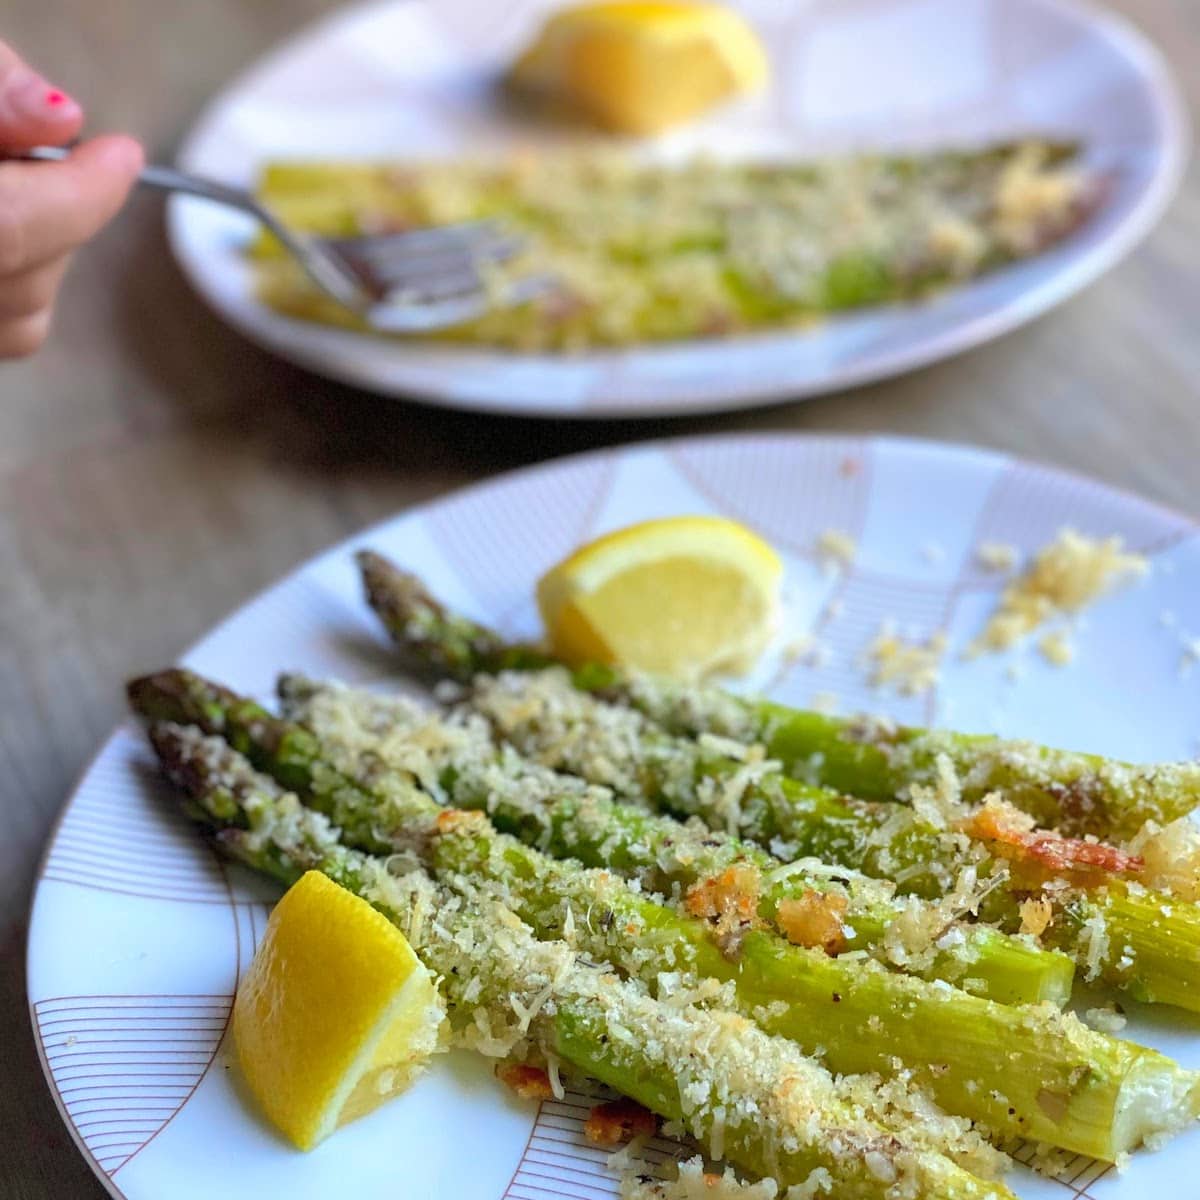 roasted asparagus with parmesan panko crumbles and lemon on plates